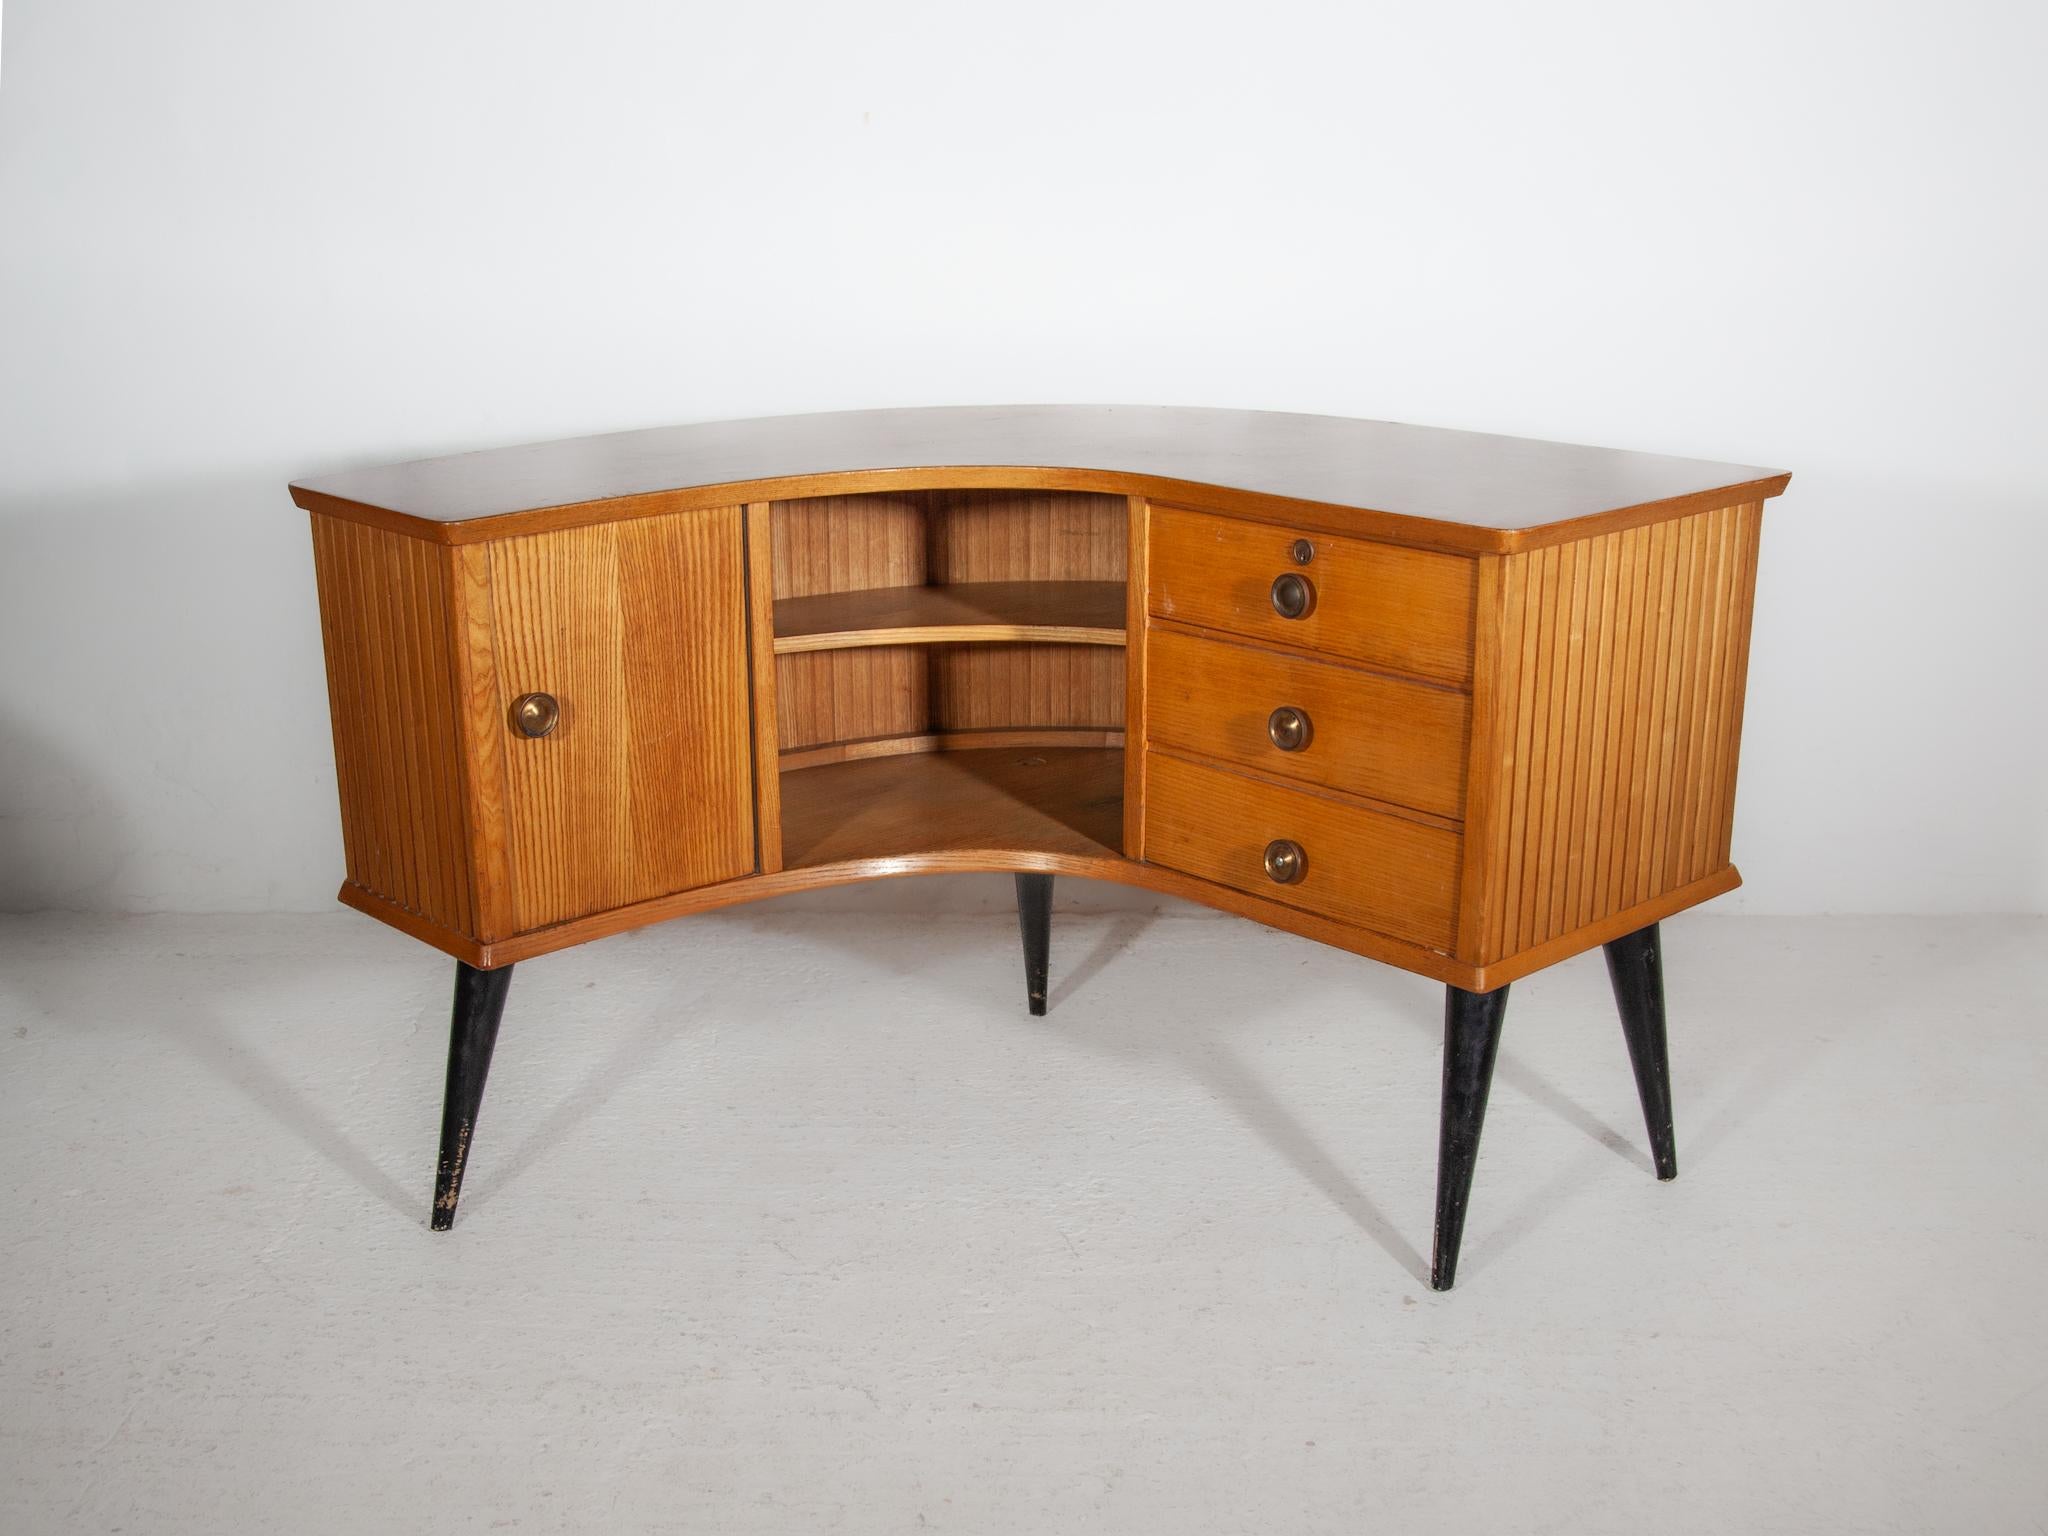 Hand-Crafted Boomerang Shaped Desk, Shop Counter, 1950s by Alfred Hendrickx For Sale